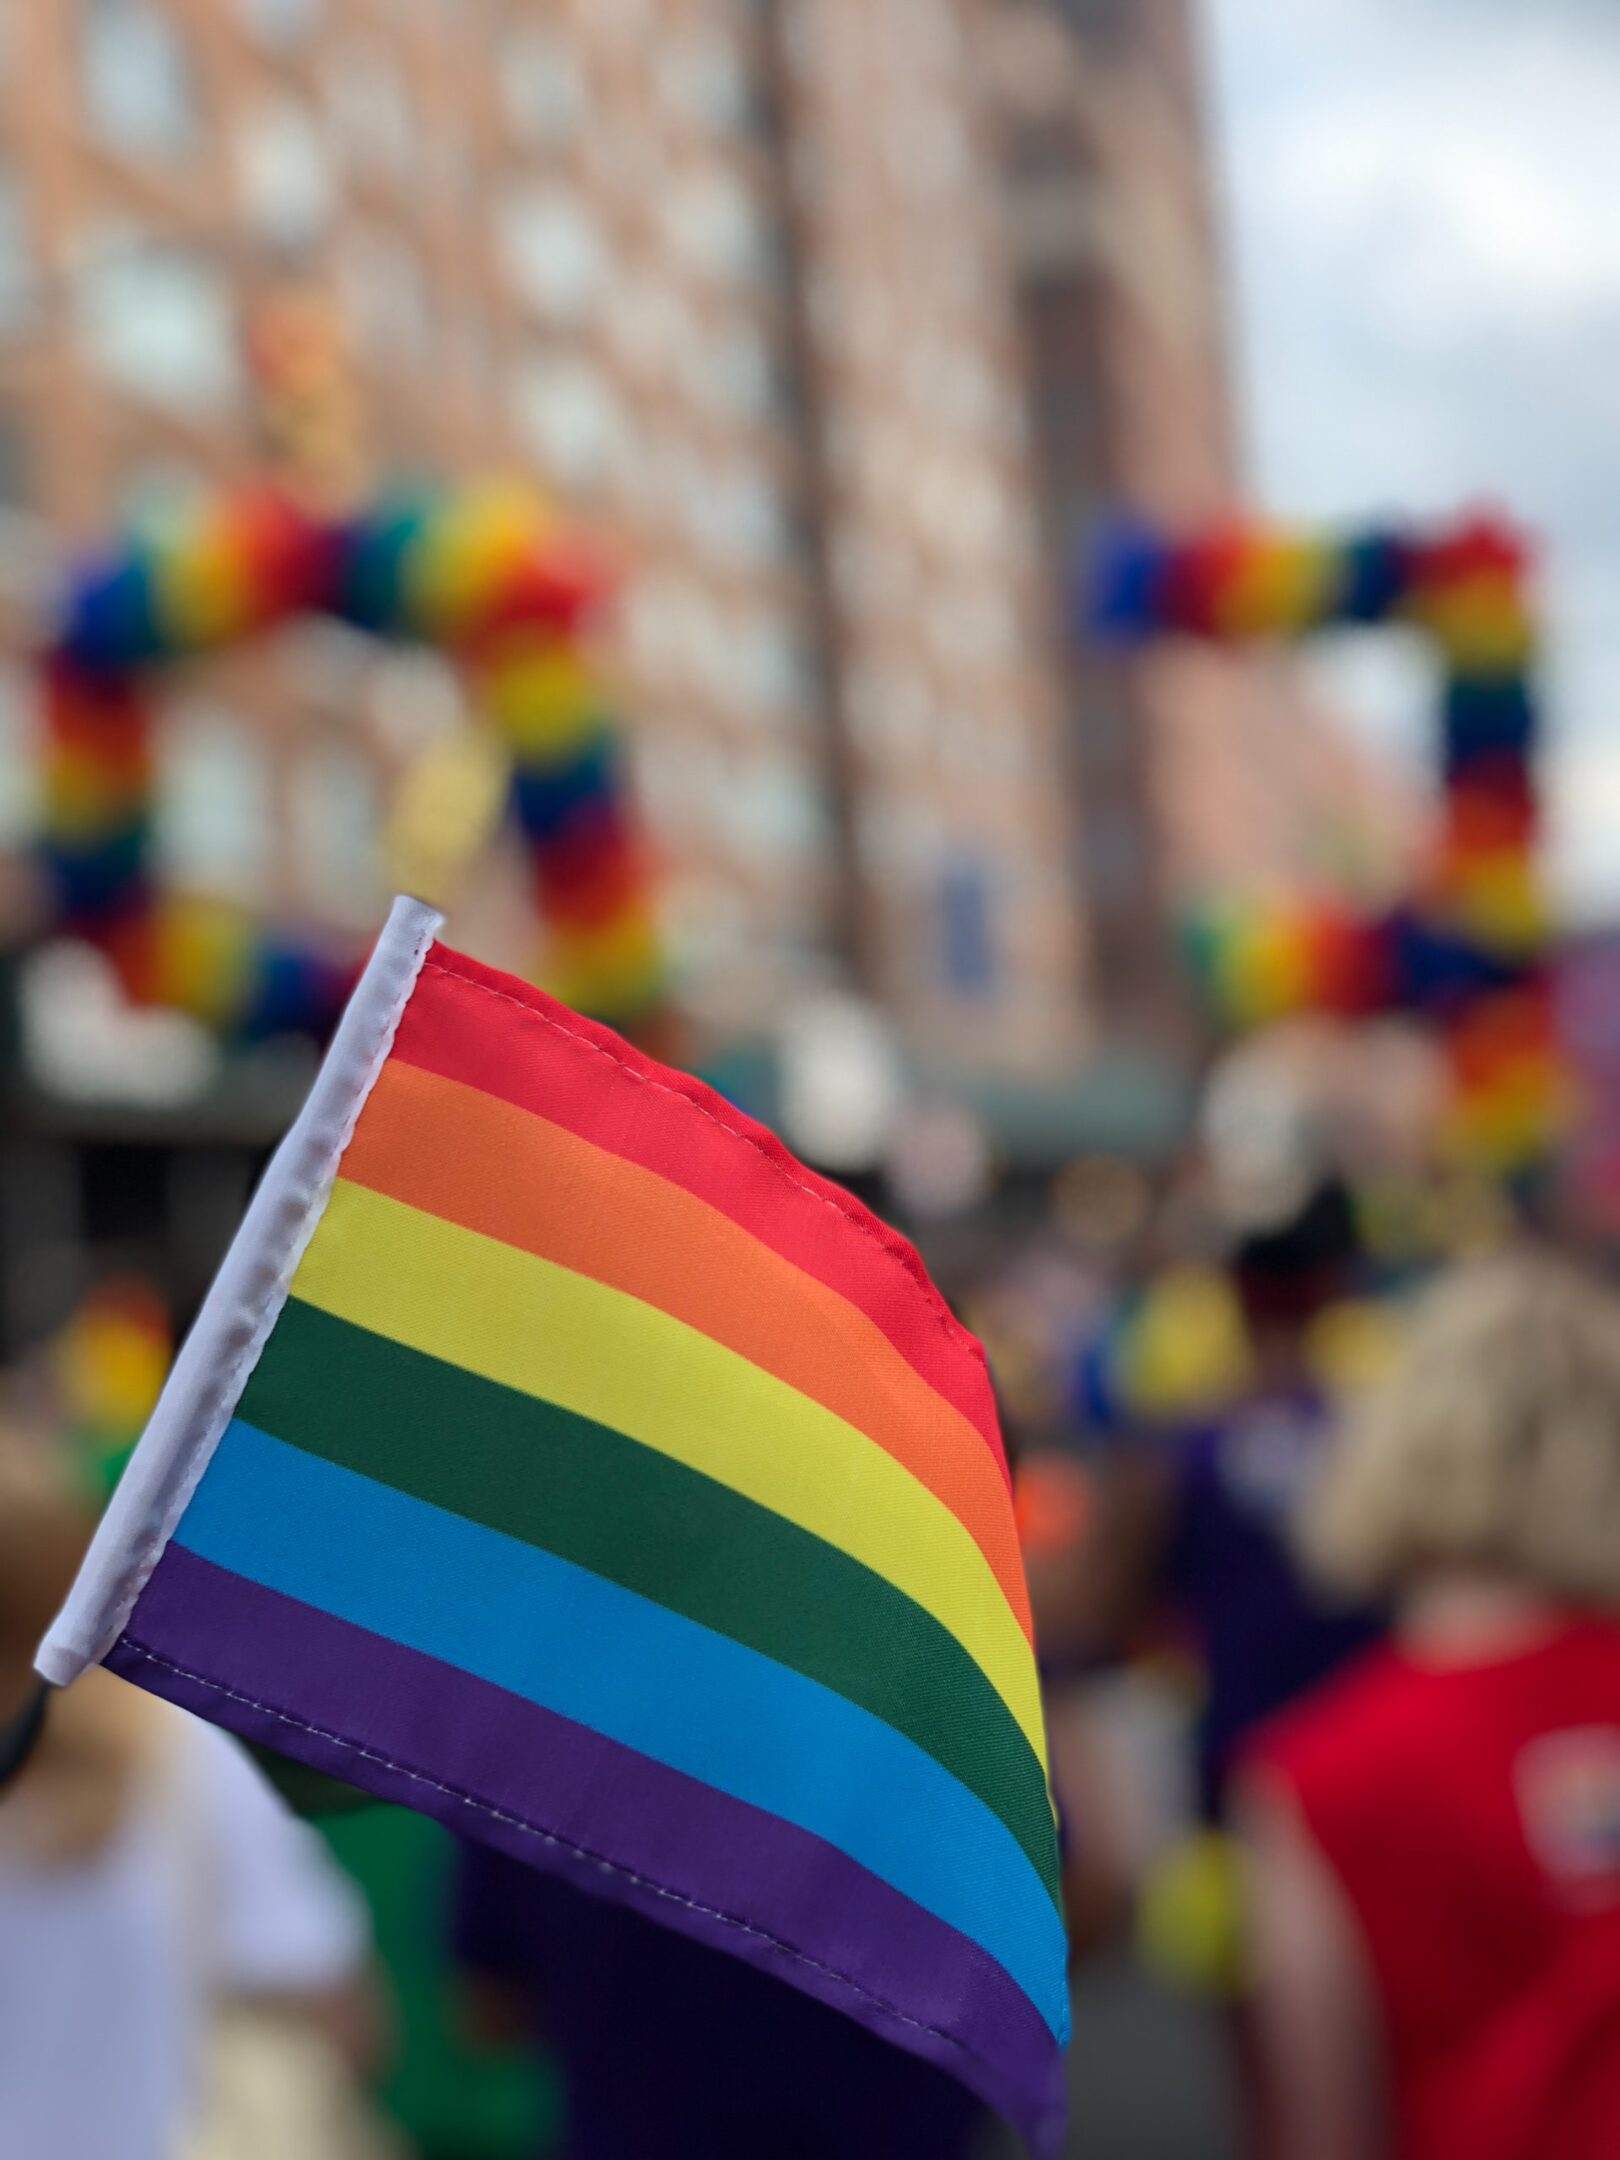 A group of people holding a rainbow flag in a parade.